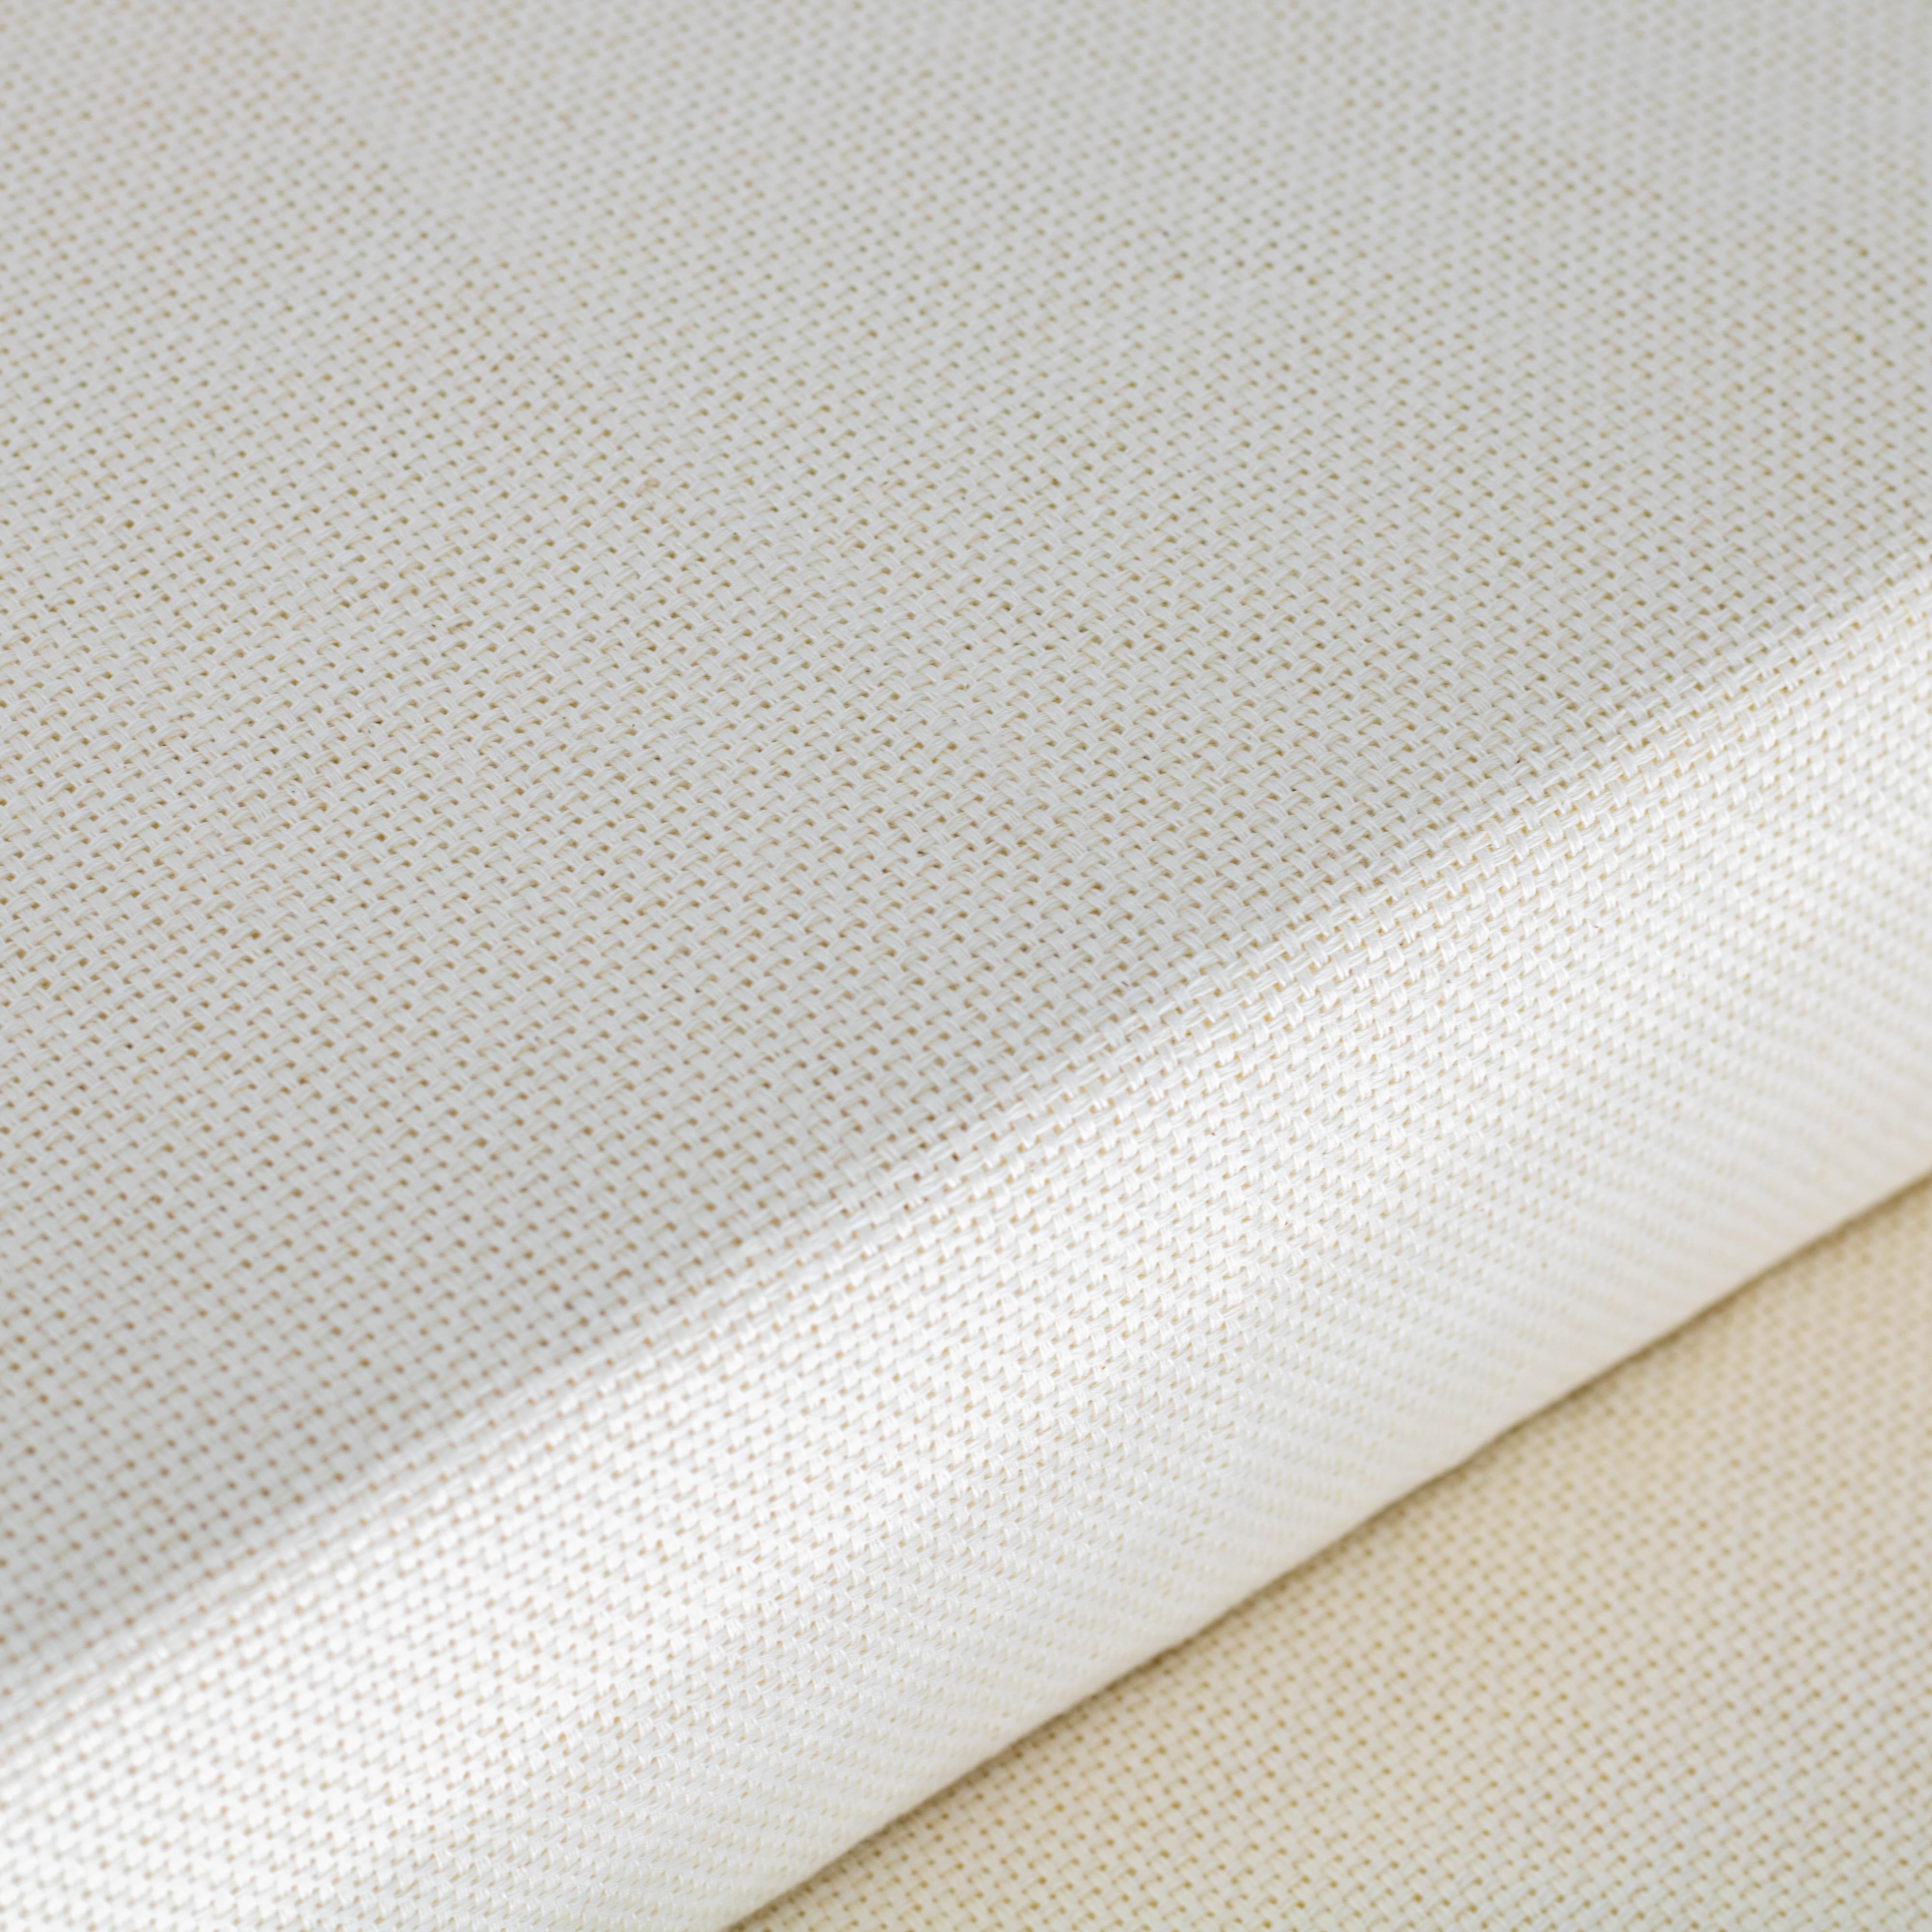 Monks Cloth Fabric - 100% Cotton Monks Cloth for Punch Needle